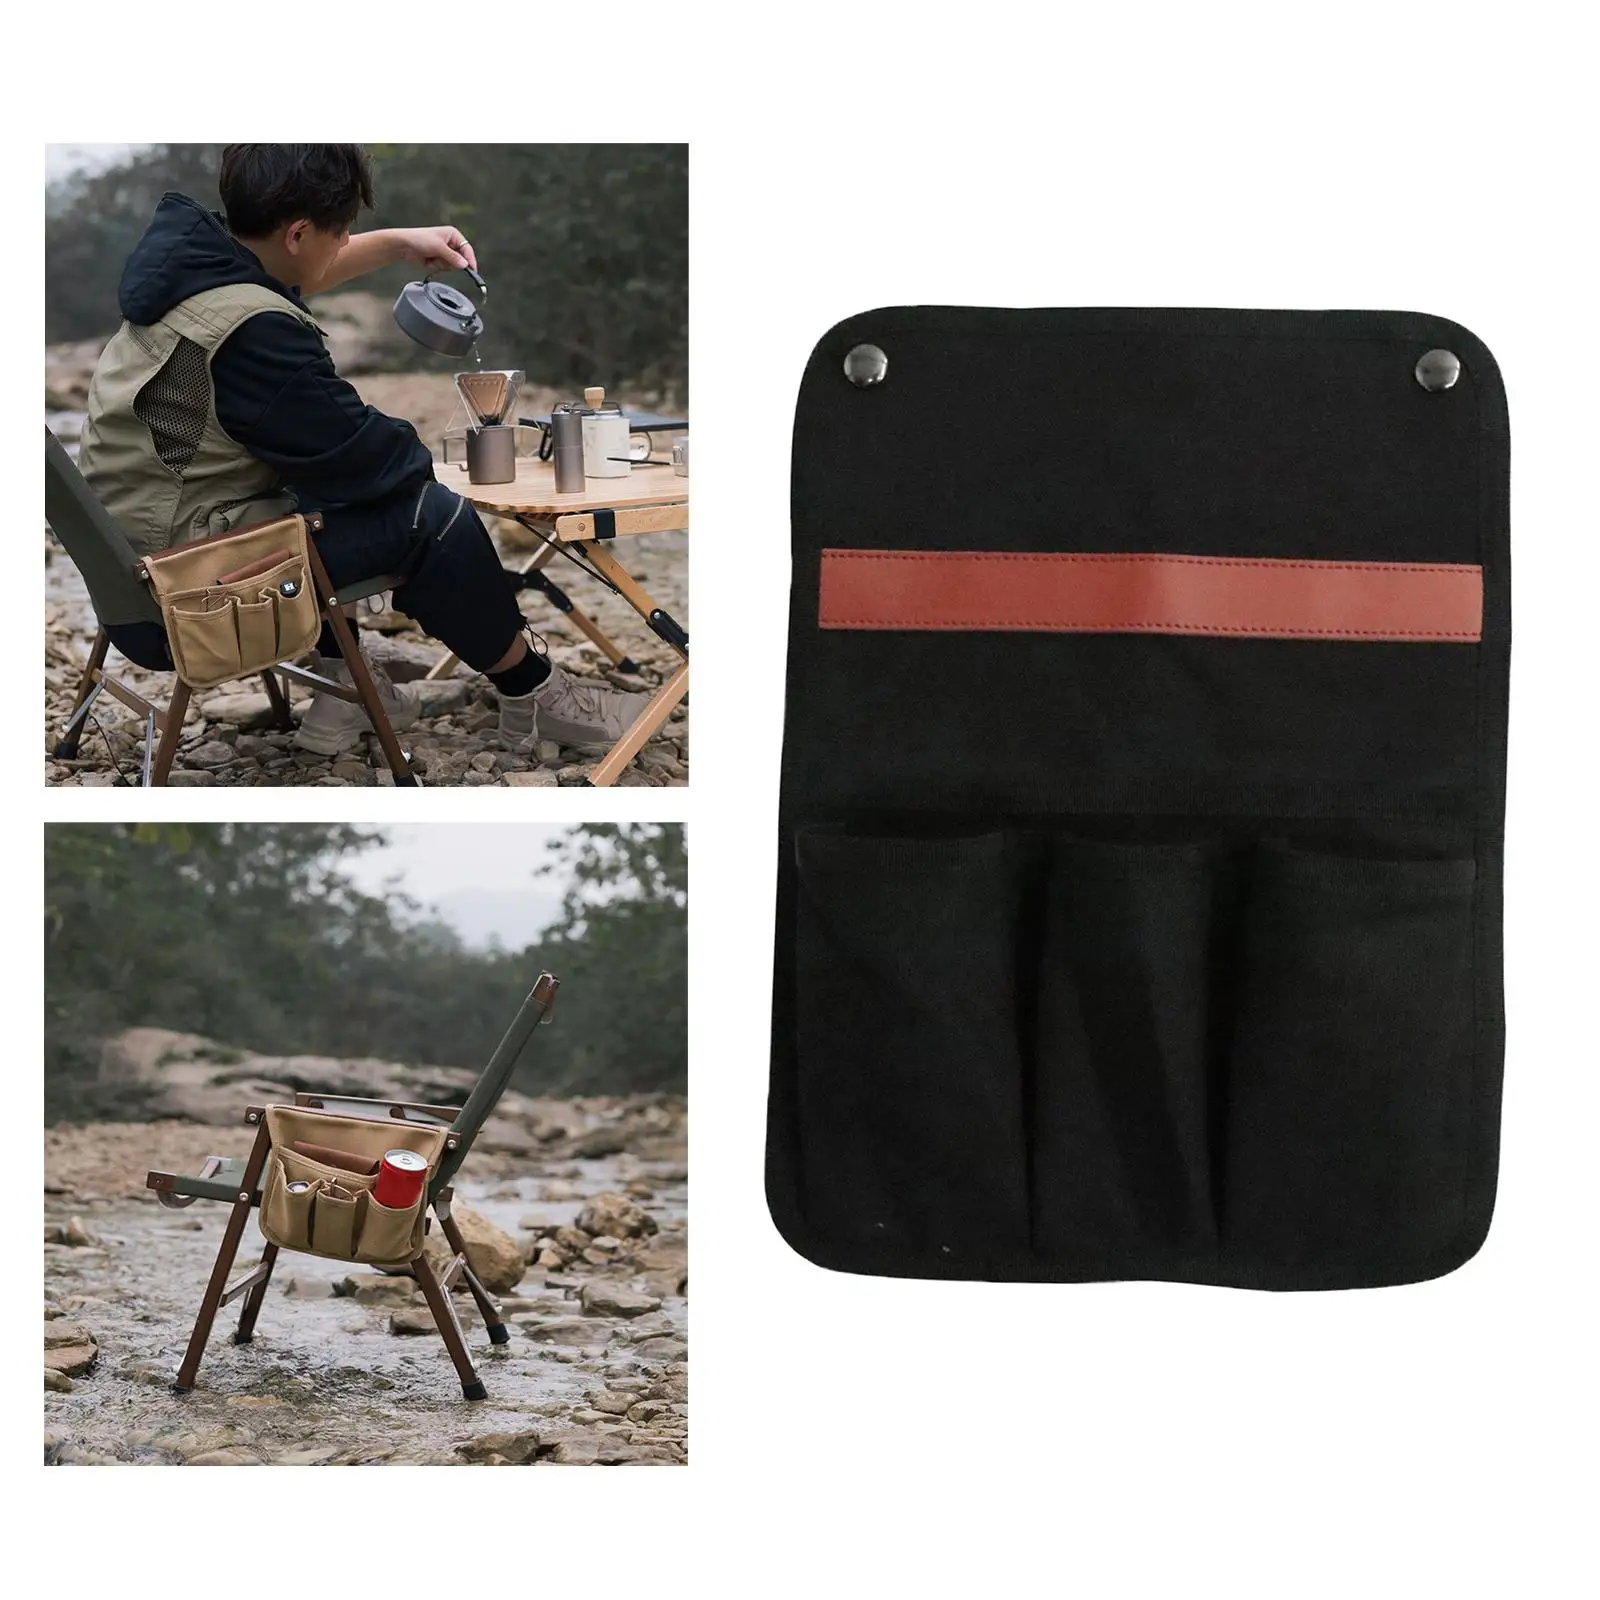 Outdoor Campsite Foldable Canvas Storage Bag Camping Fishing Beach Chaise Longue Portable Handbag for Phones Glasses